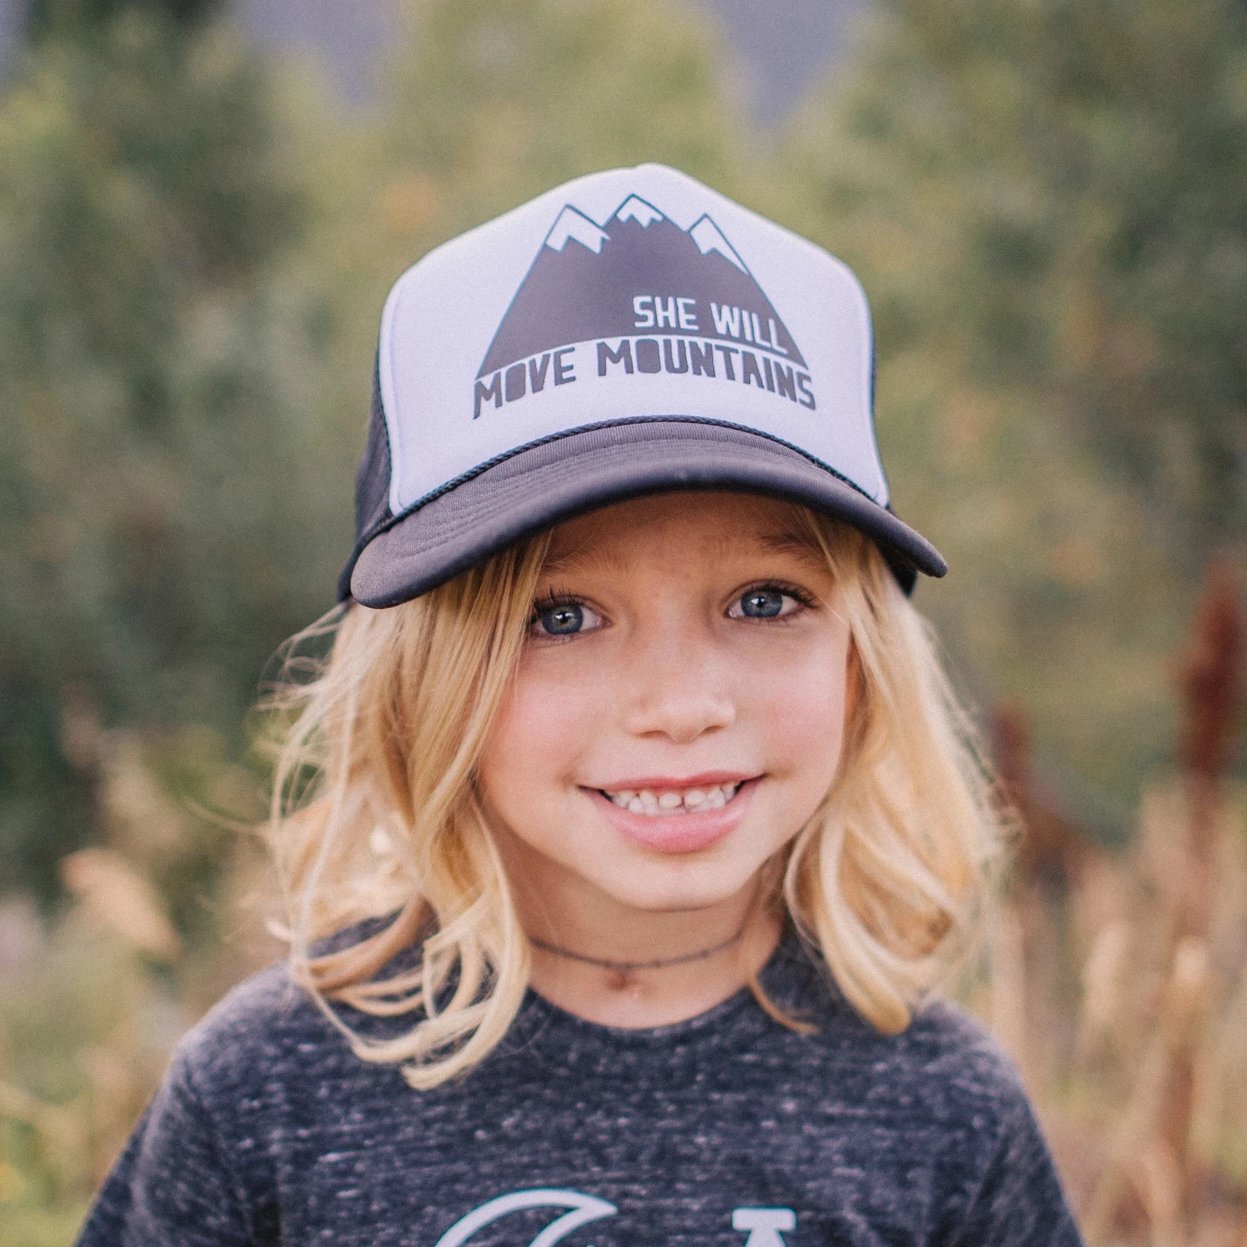 She Will Move Mountains Kids Hat